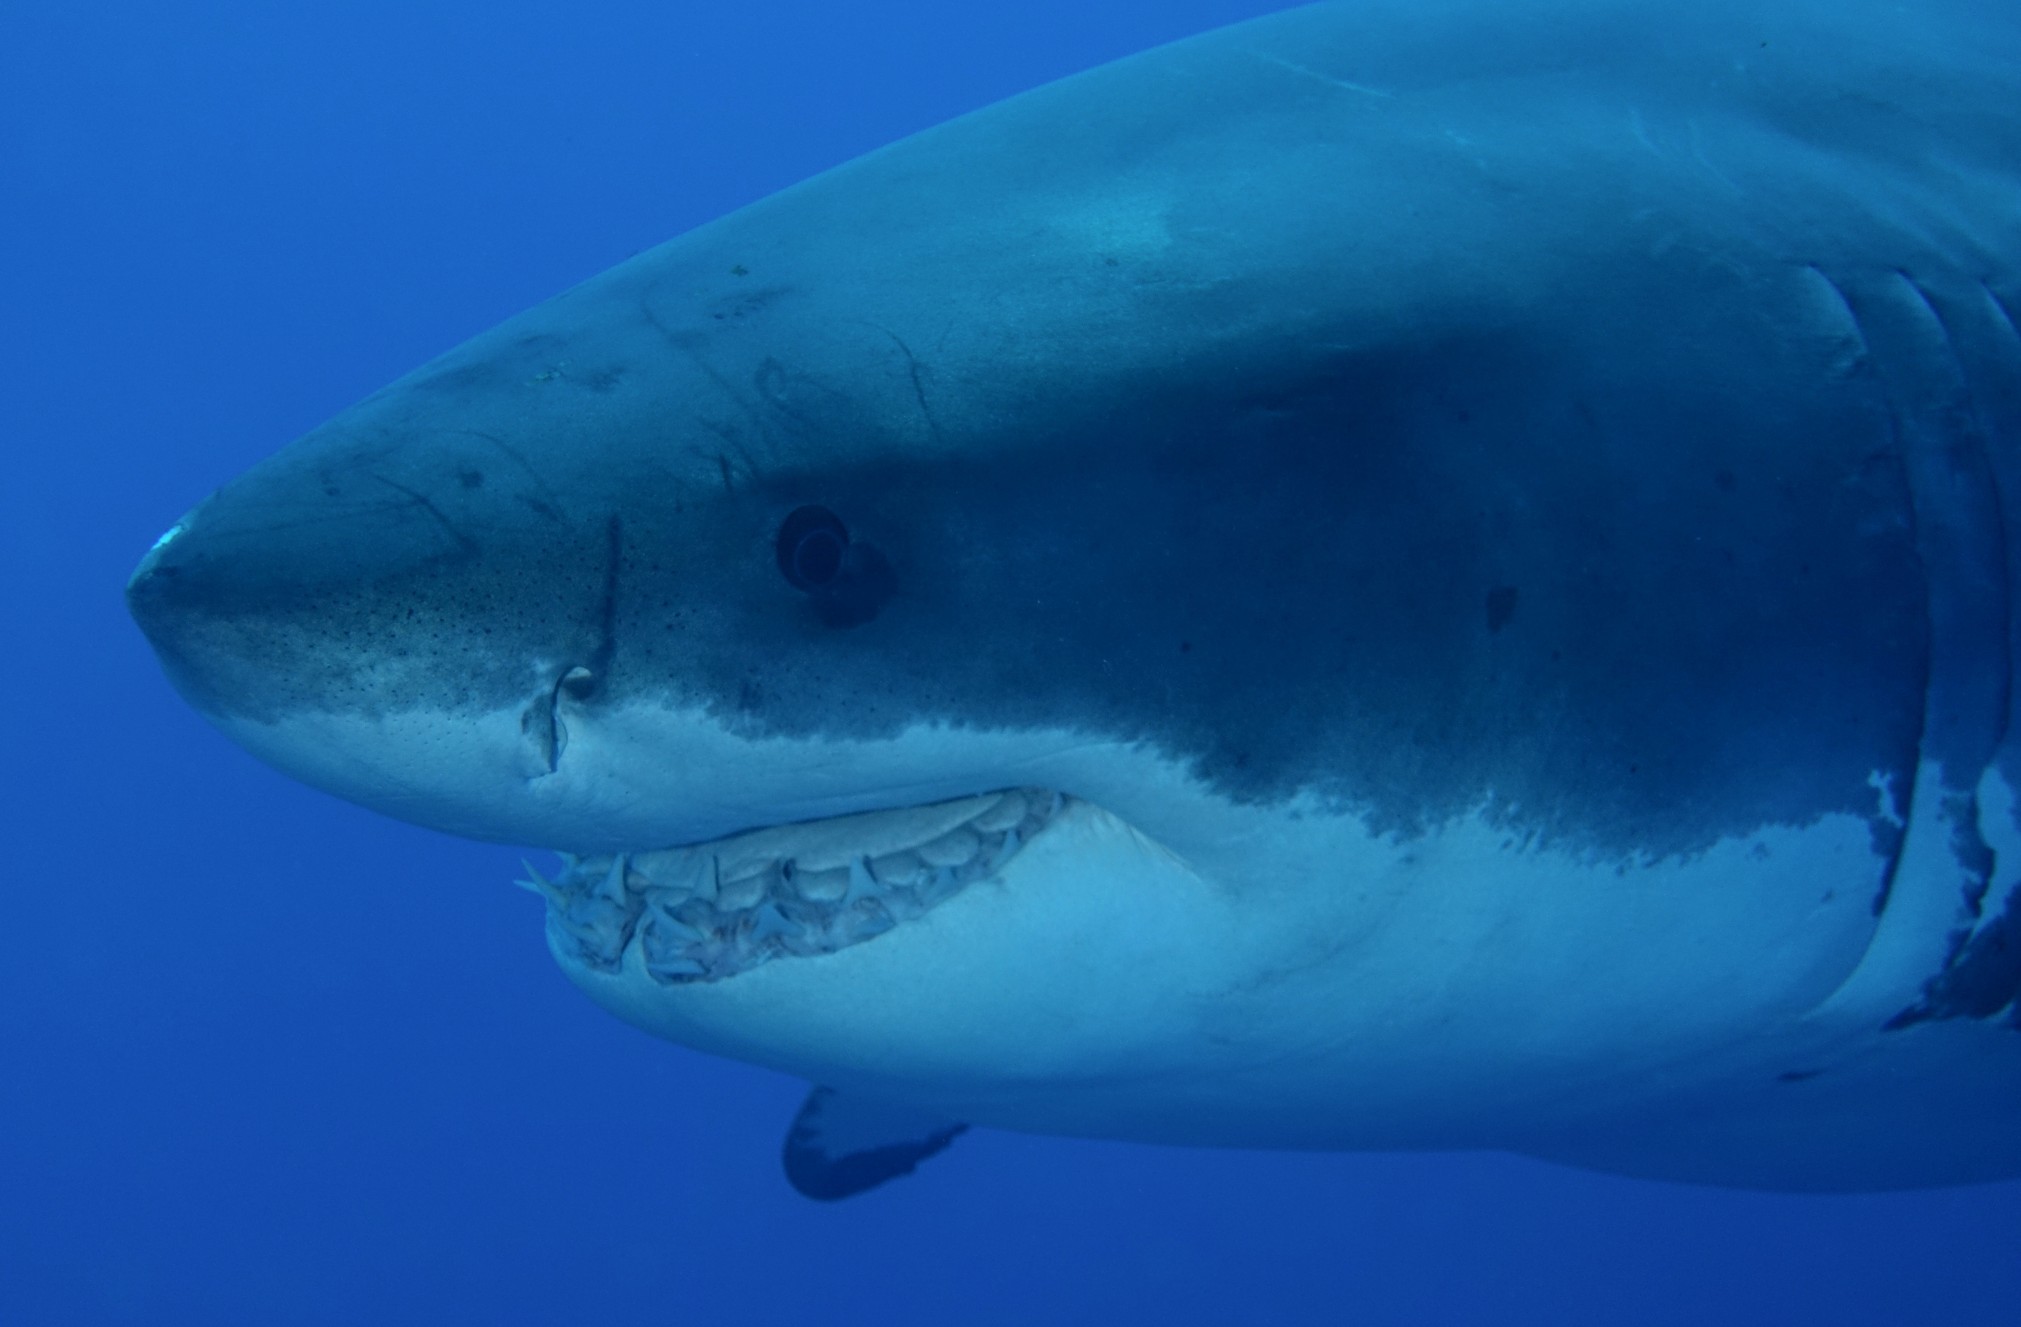 A great encounter with a Great White Shark.